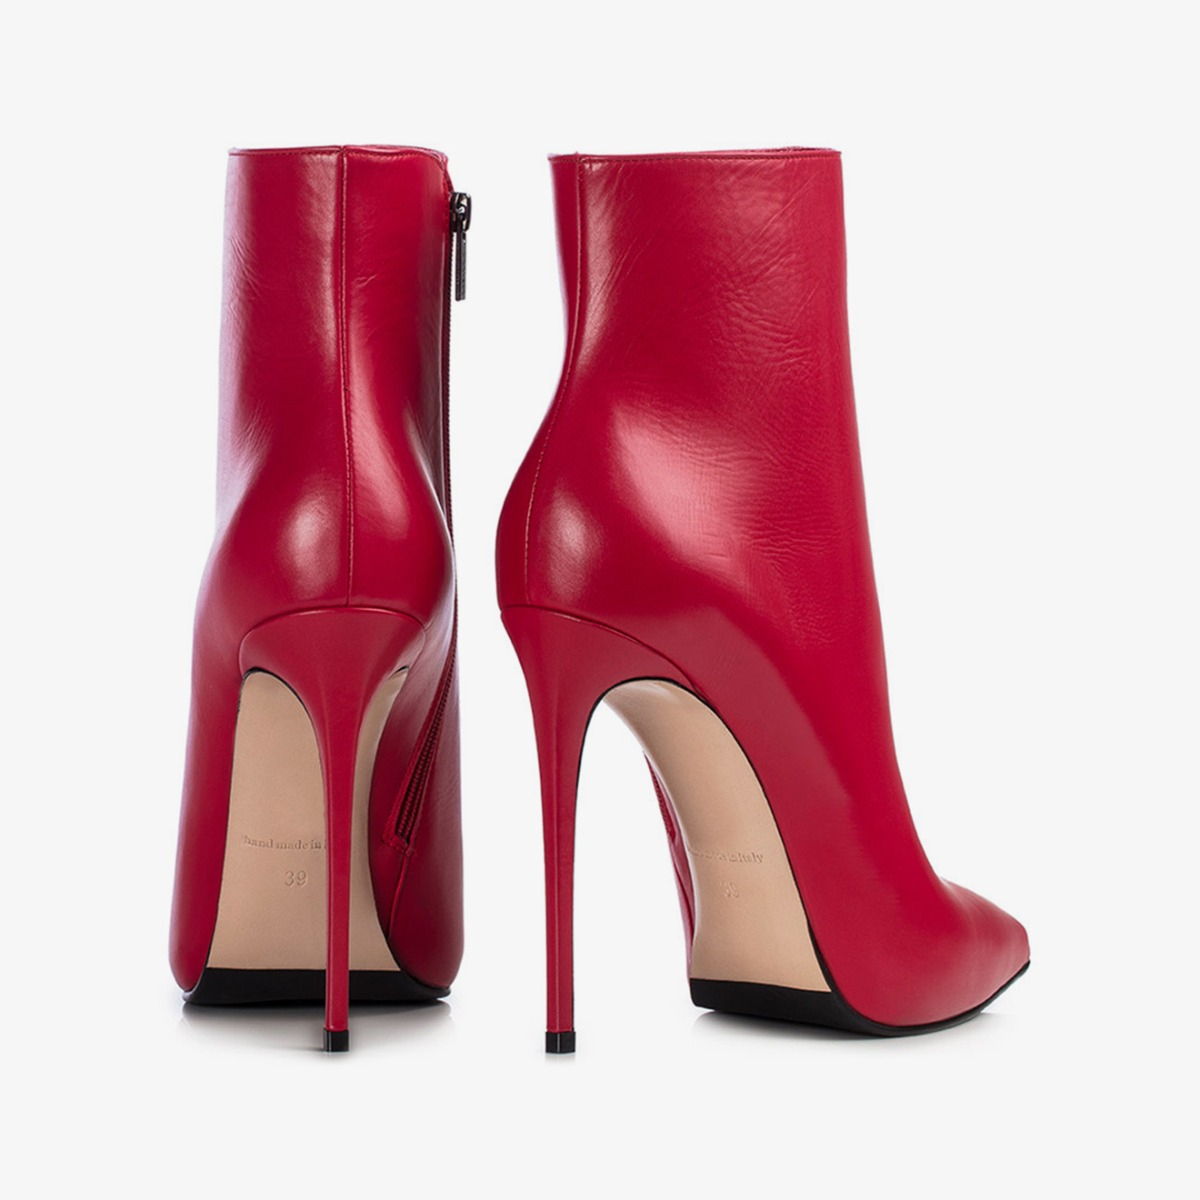 EVA ANKLE BOOT 120 mm - Le Silla official outlet